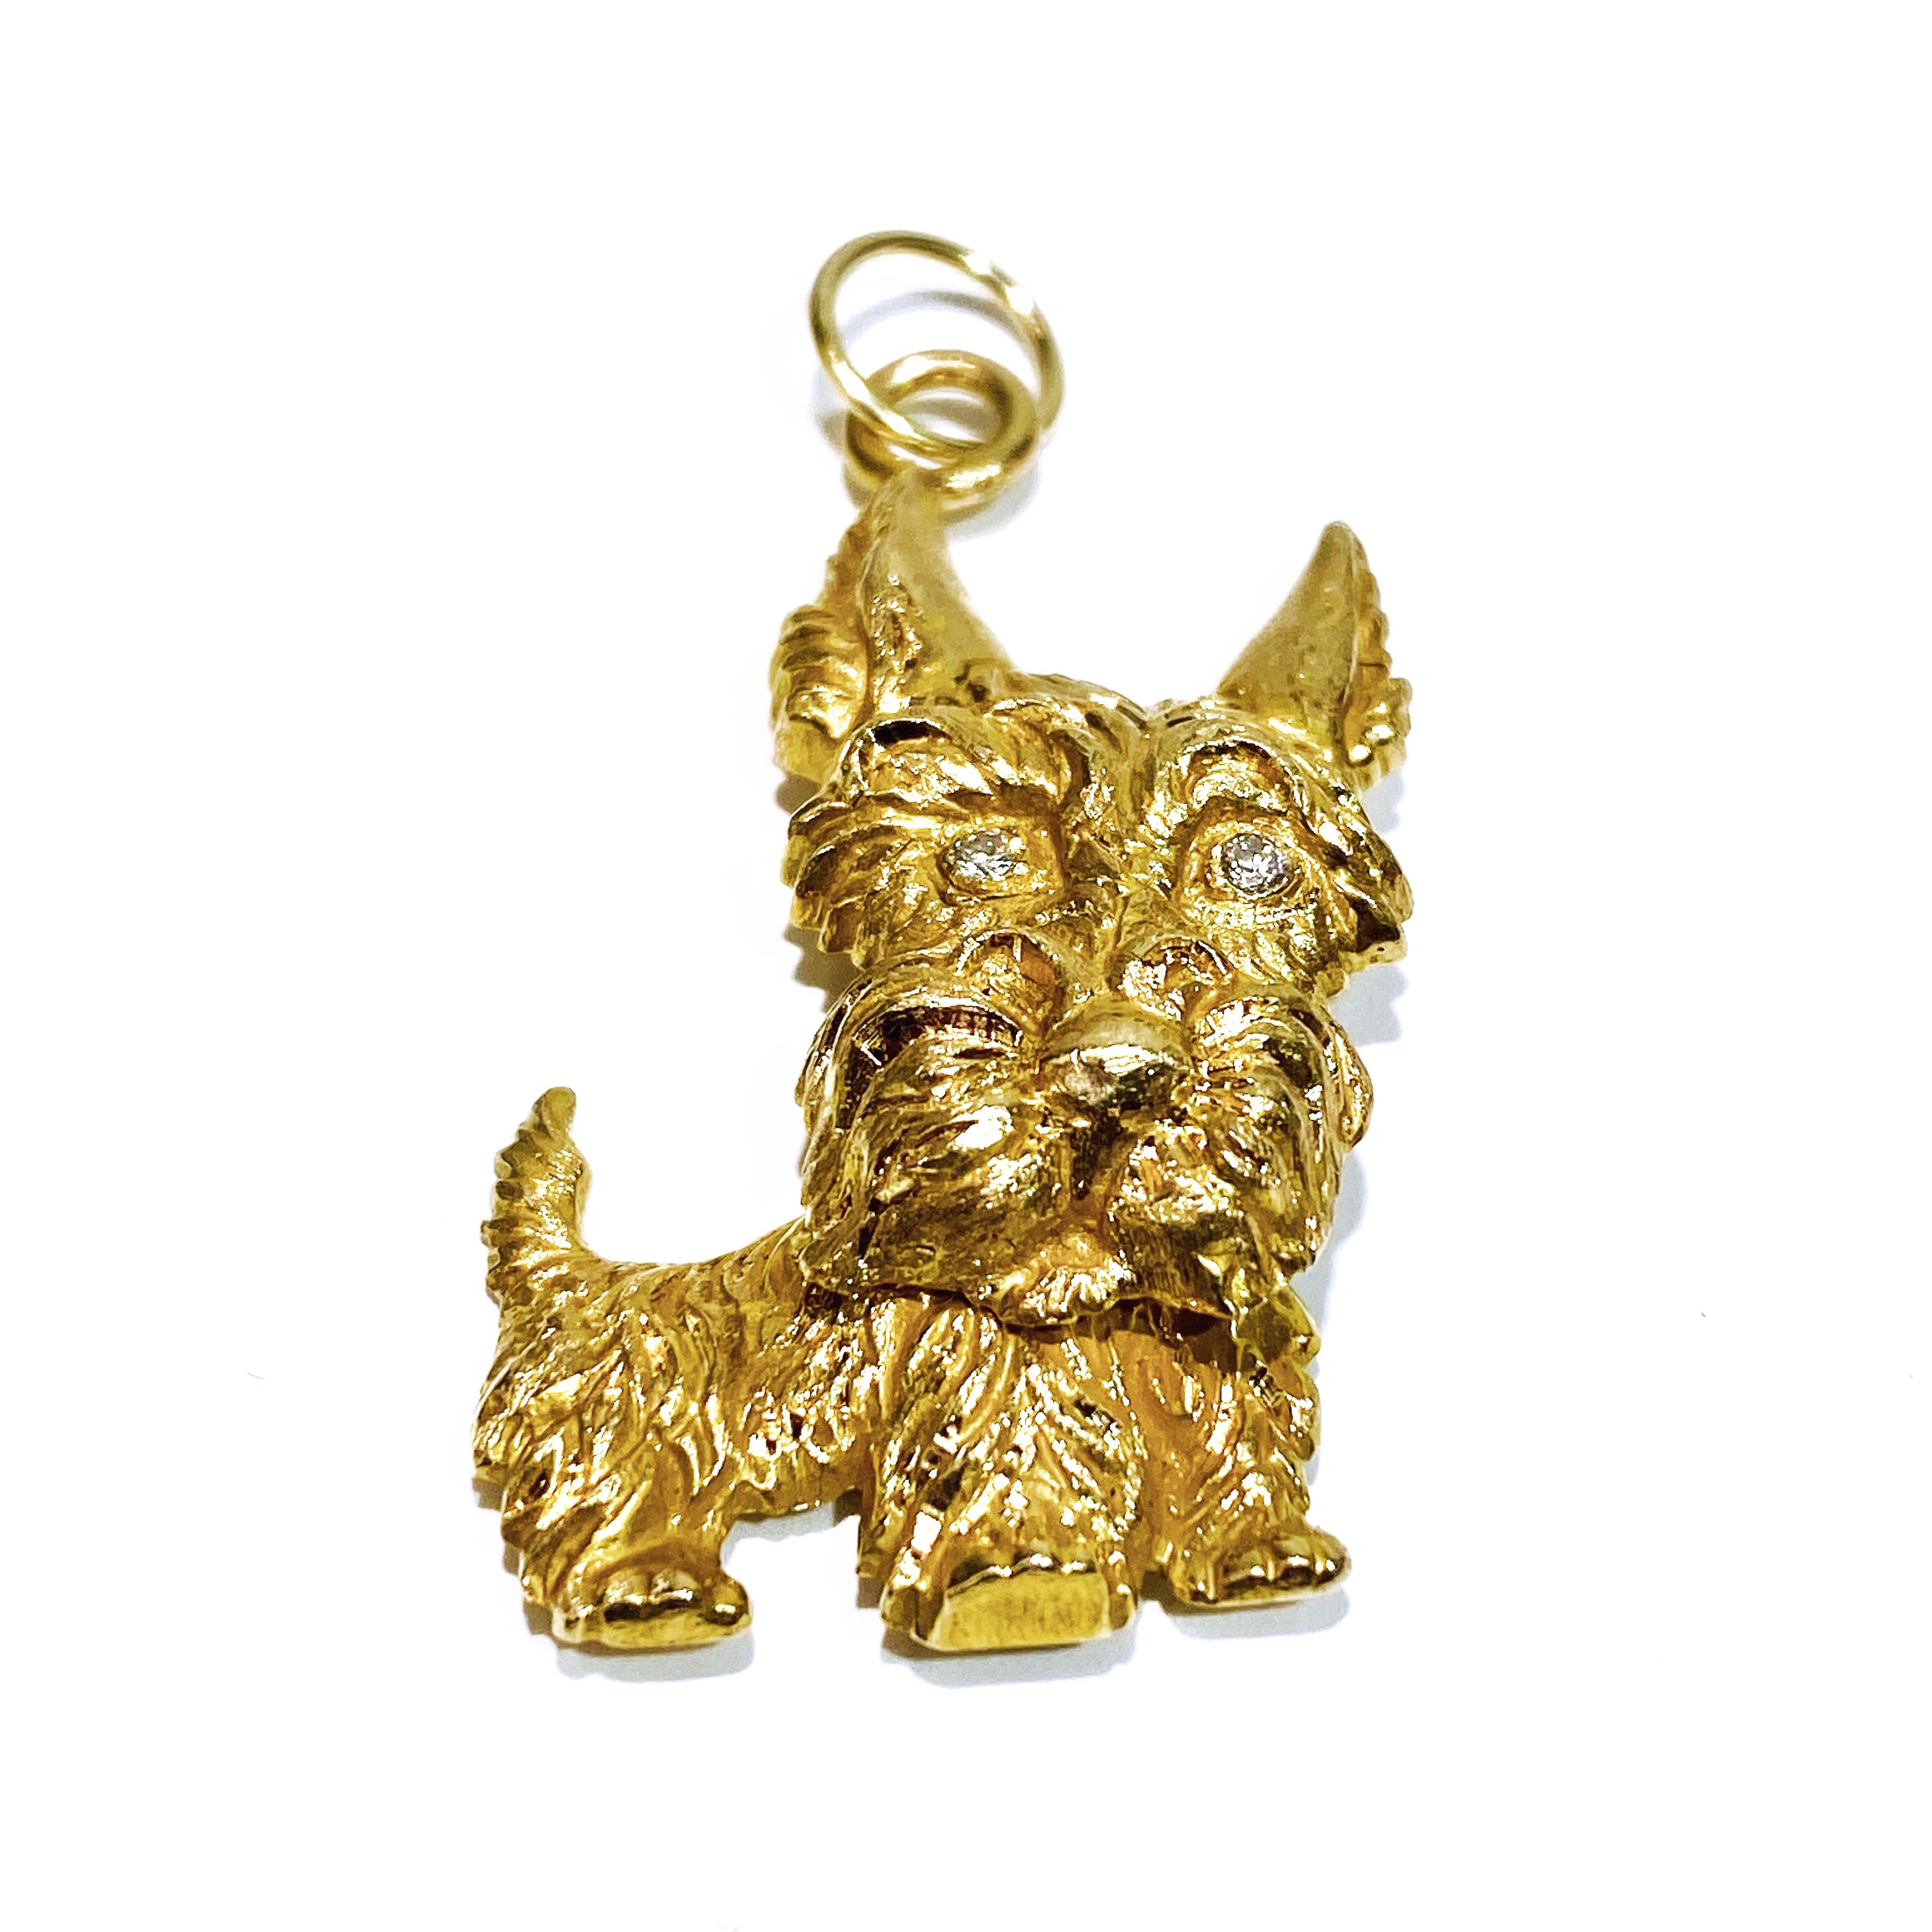 14 Karat Gold Terrier Dog Pendant. The adorable Terrier dog has a hinge on the back of the neck allowing the head to tilt to both the left or right. The diamonds are SI1 in clarity (G.I.A.) and H in color (G.I.A.). Two round diamonds are bezel-set